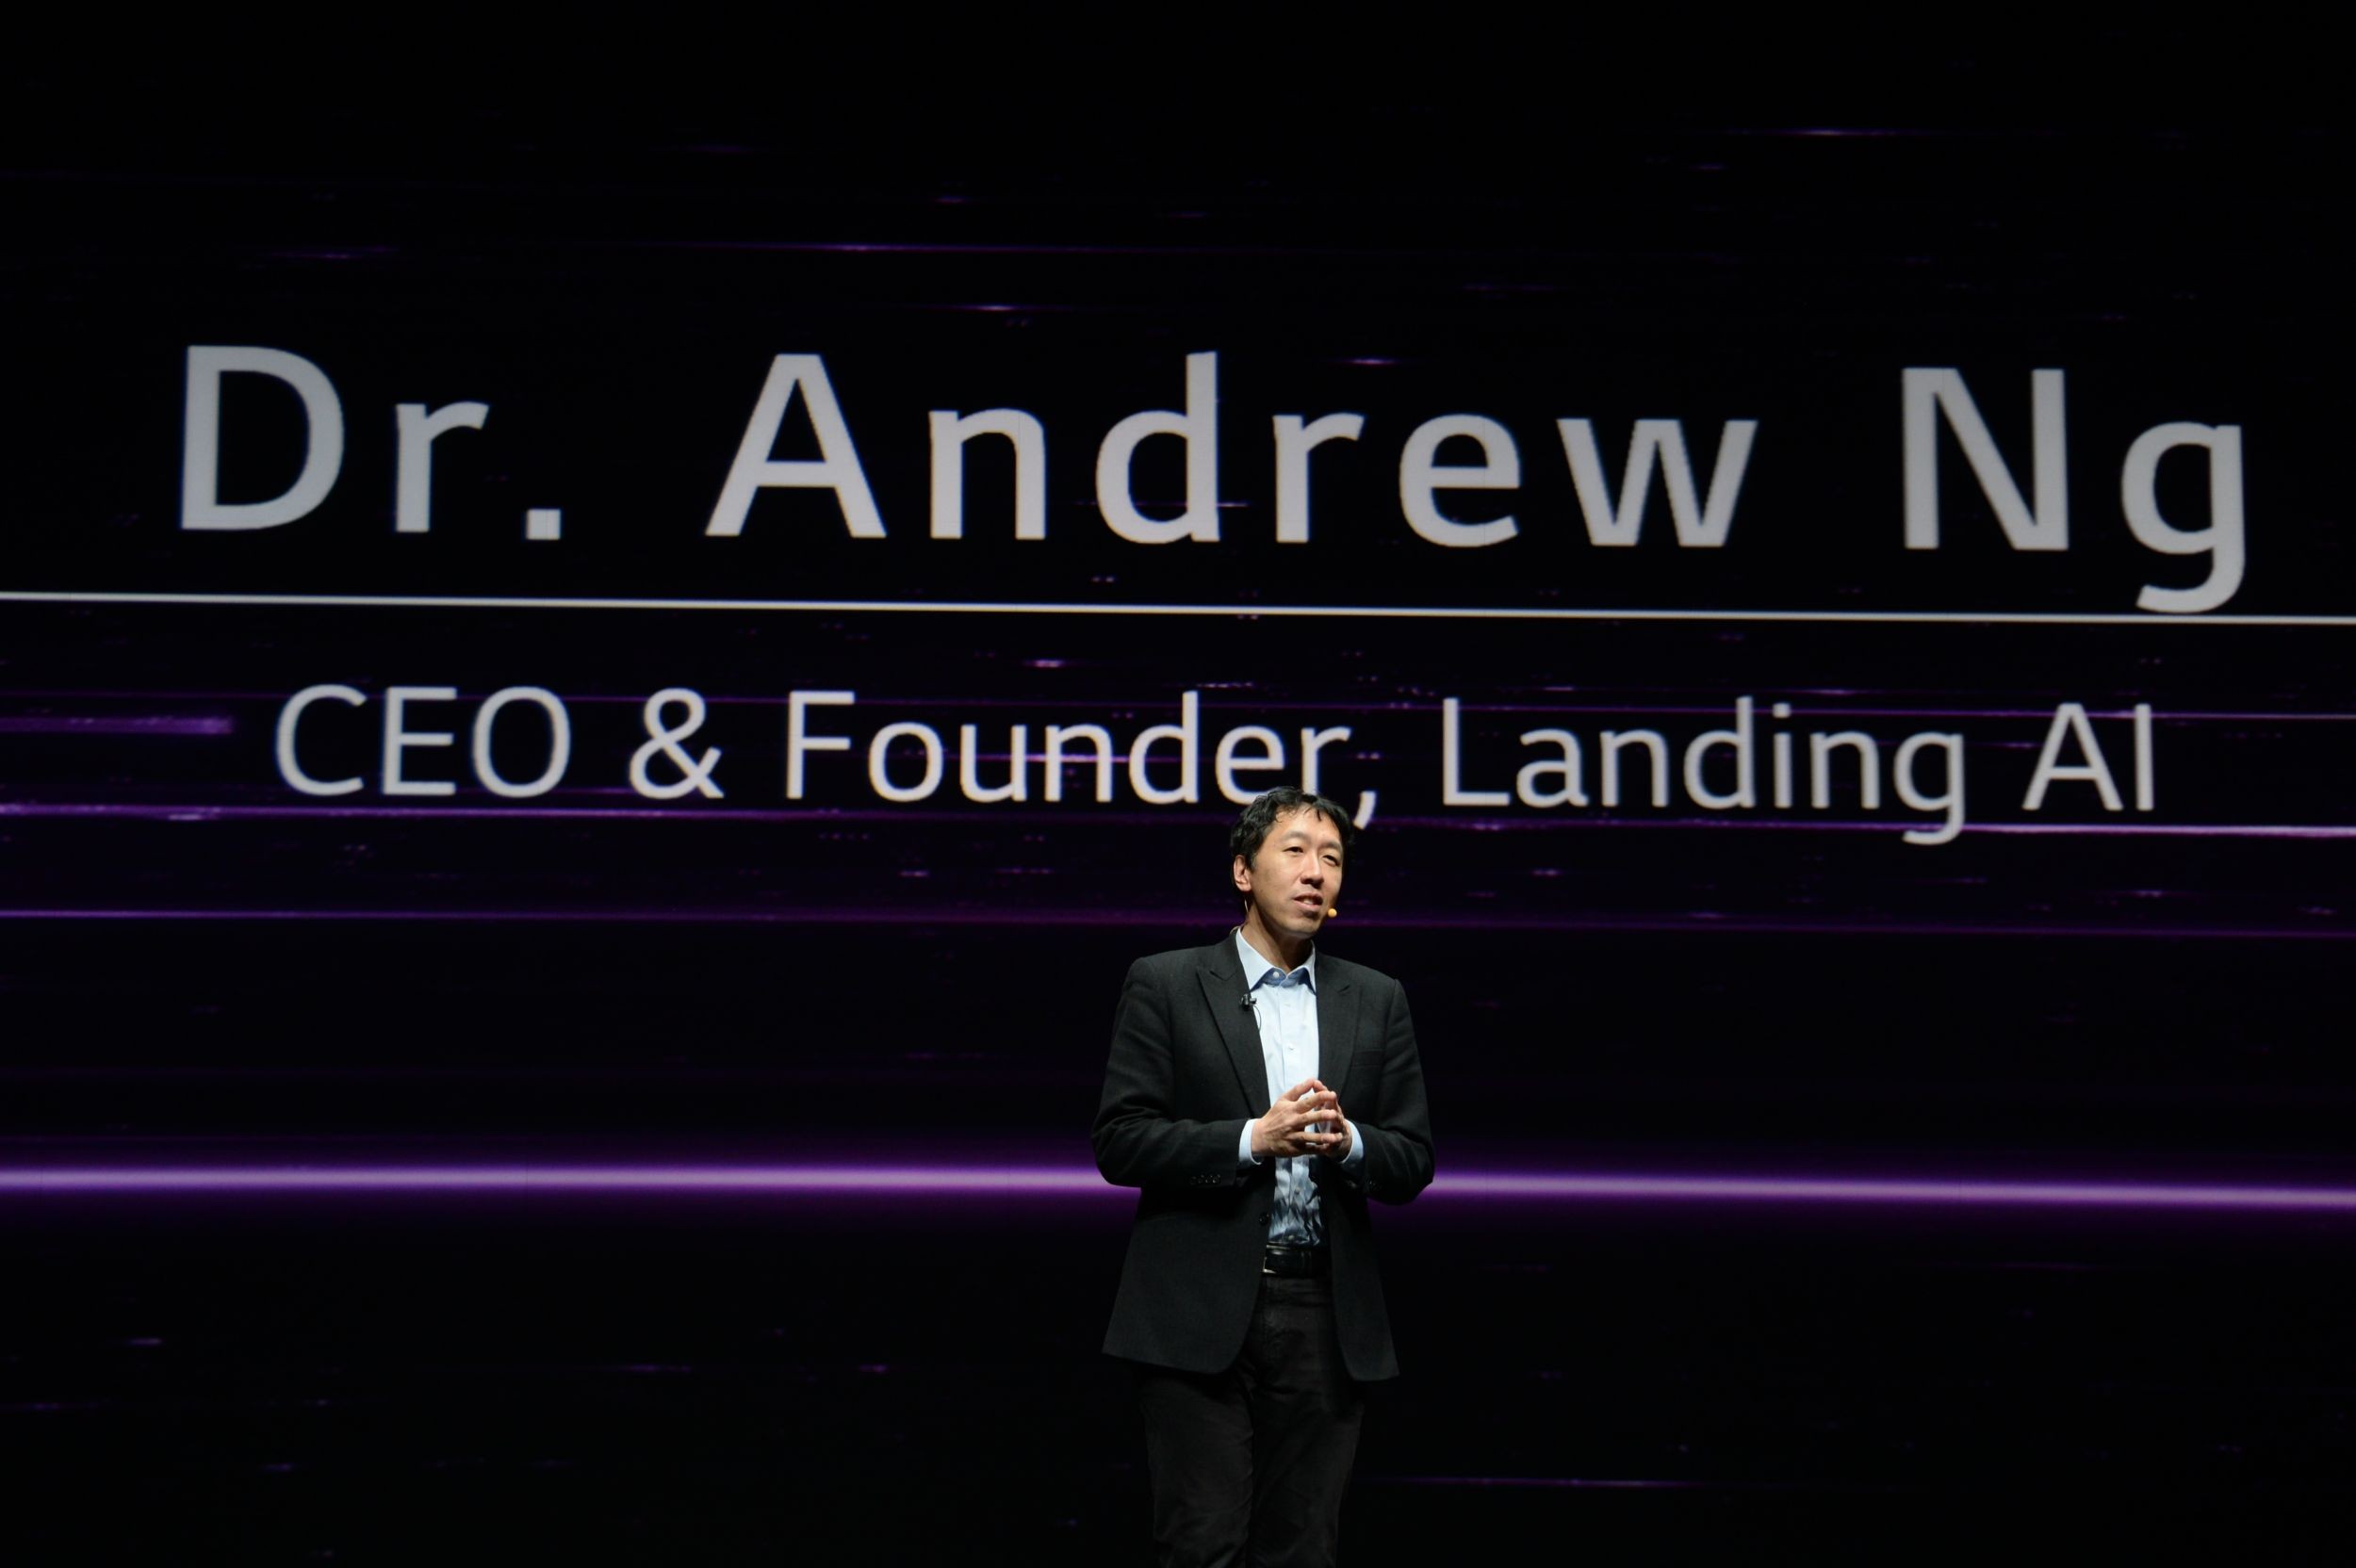 Dr. Andrew Ng, CEO and founder of Landing AI, addresses the audience.